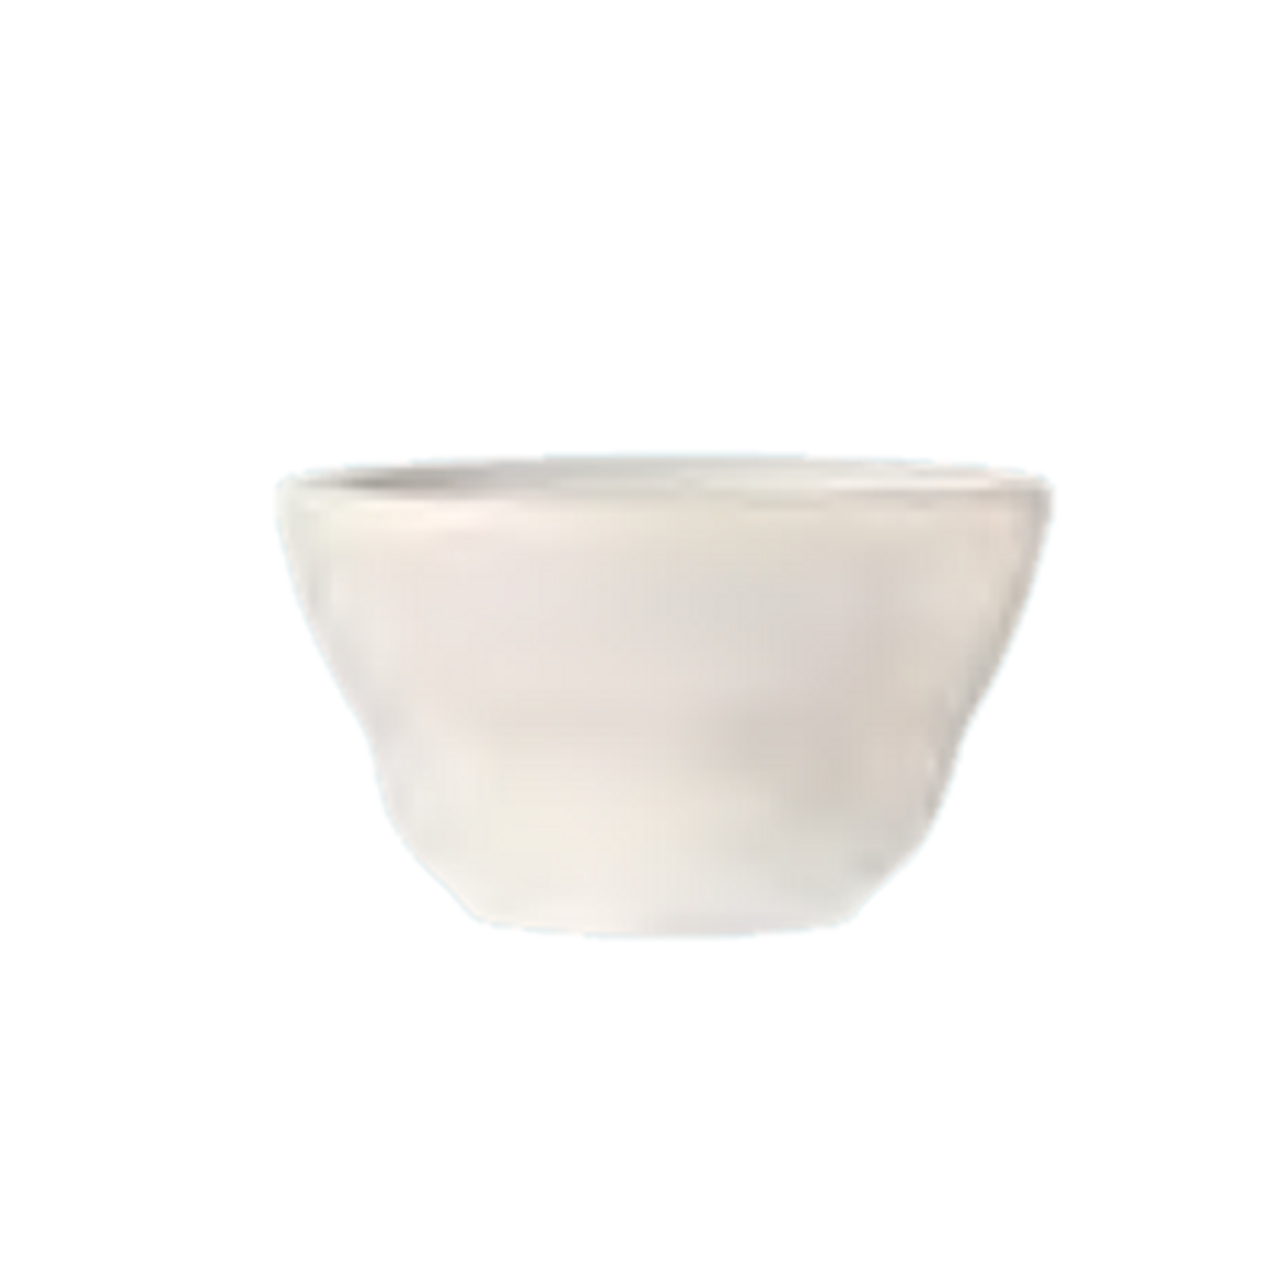 https://cdn11.bigcommerce.com/s-g3i86bef61/images/stencil/1280x1280/products/3868/2337/World-Tableware-840-345-007-Bouillon-Cup__30076.1664303184.png?c=1